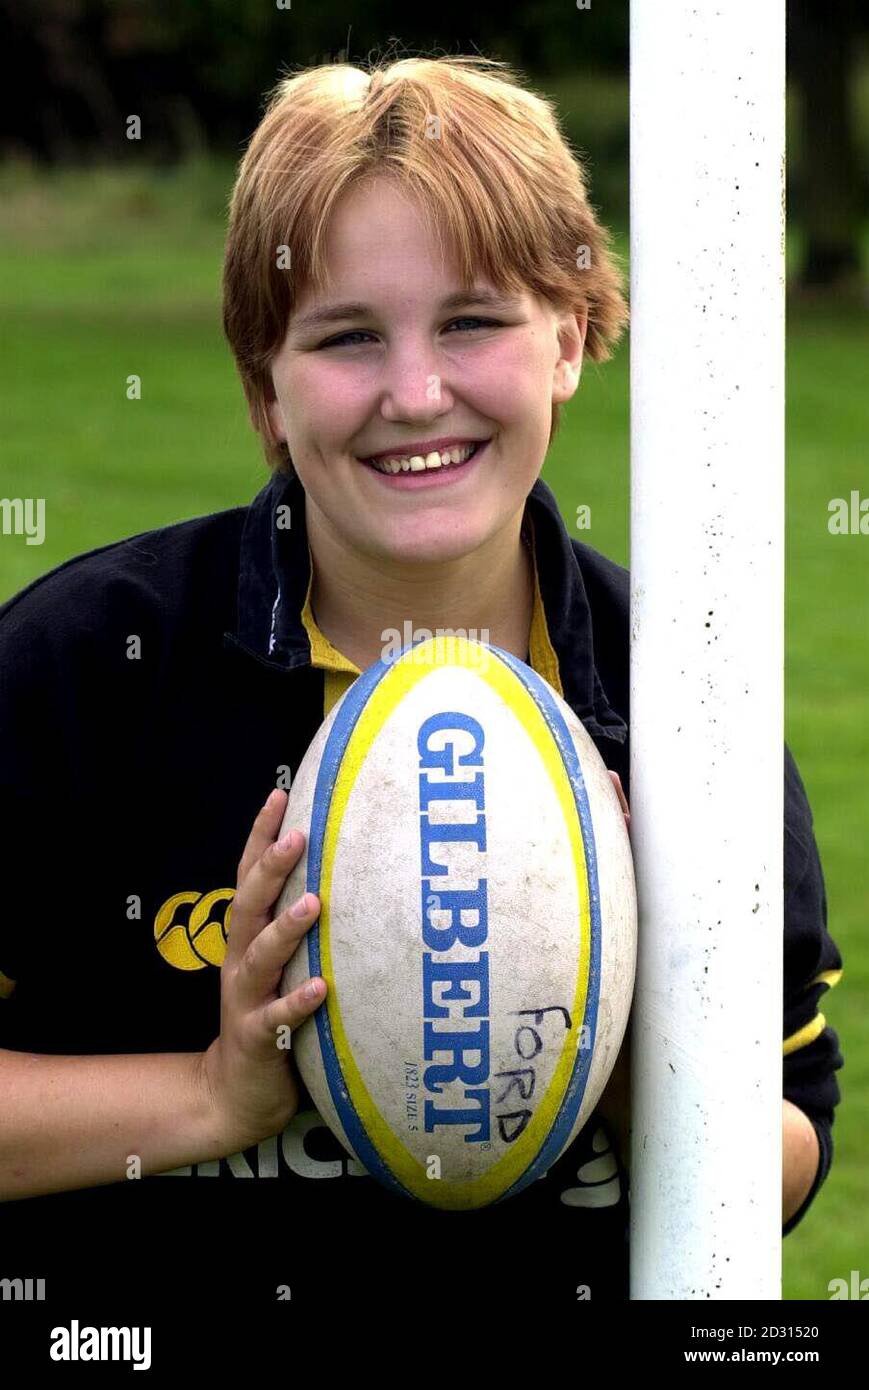 Katherine Ford training near her home in Northholt, West London. Katherine aged 17, is the first girl to take a college course in sport specialising in rugby studies at Hartbury College, Gloucest. Stock Photo